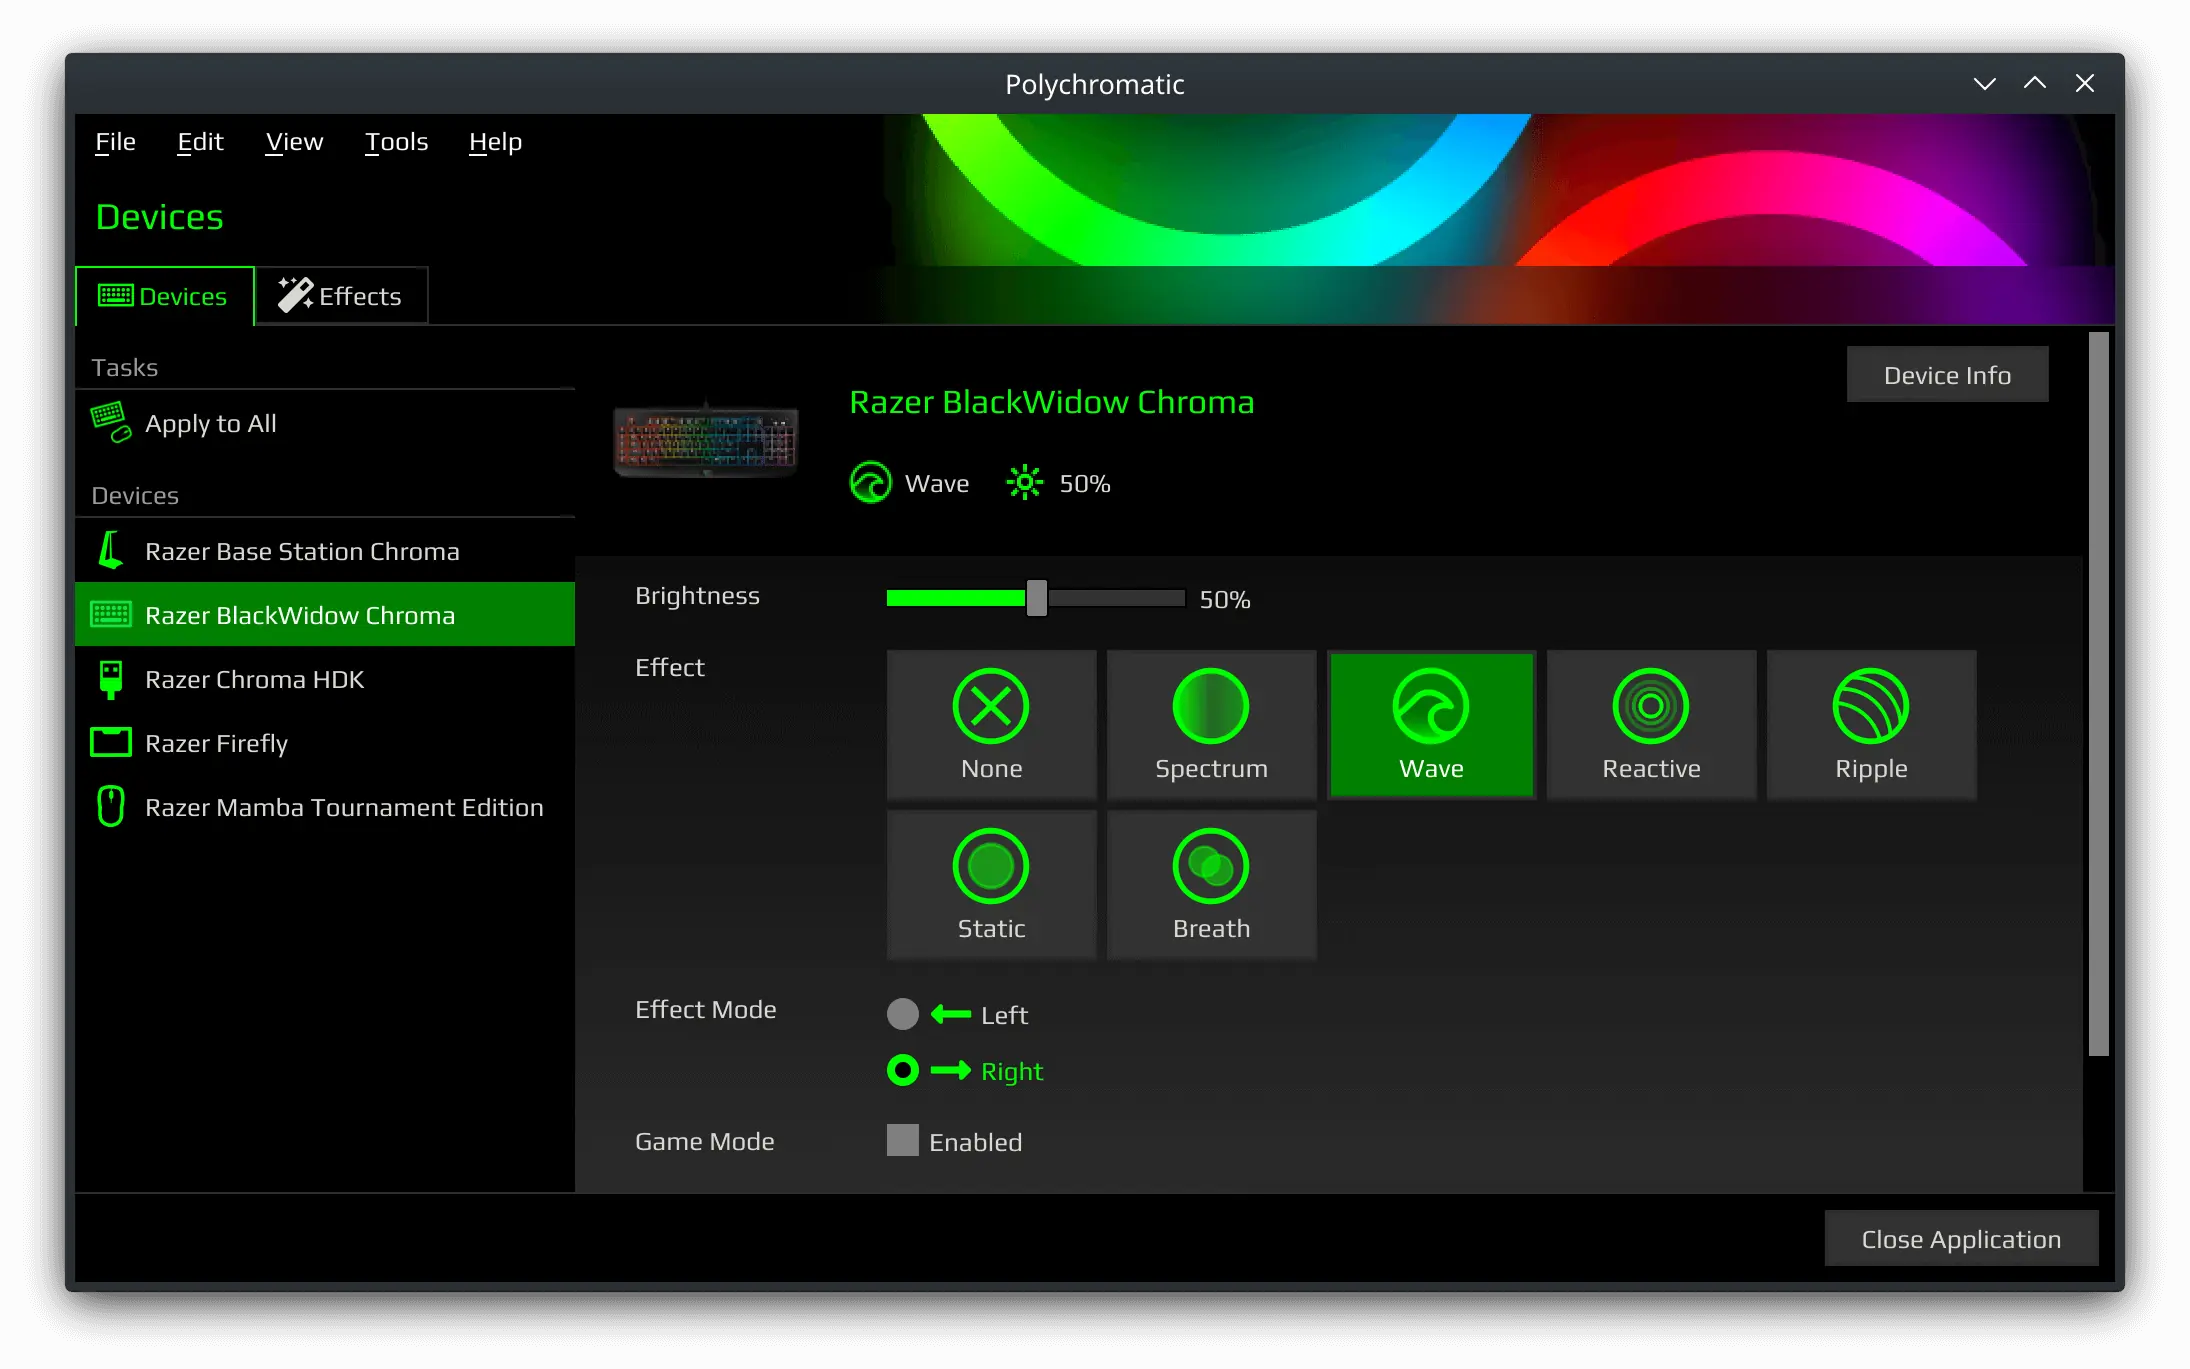 Screenshot of Polychromatic's v1.0.0 Controller interface